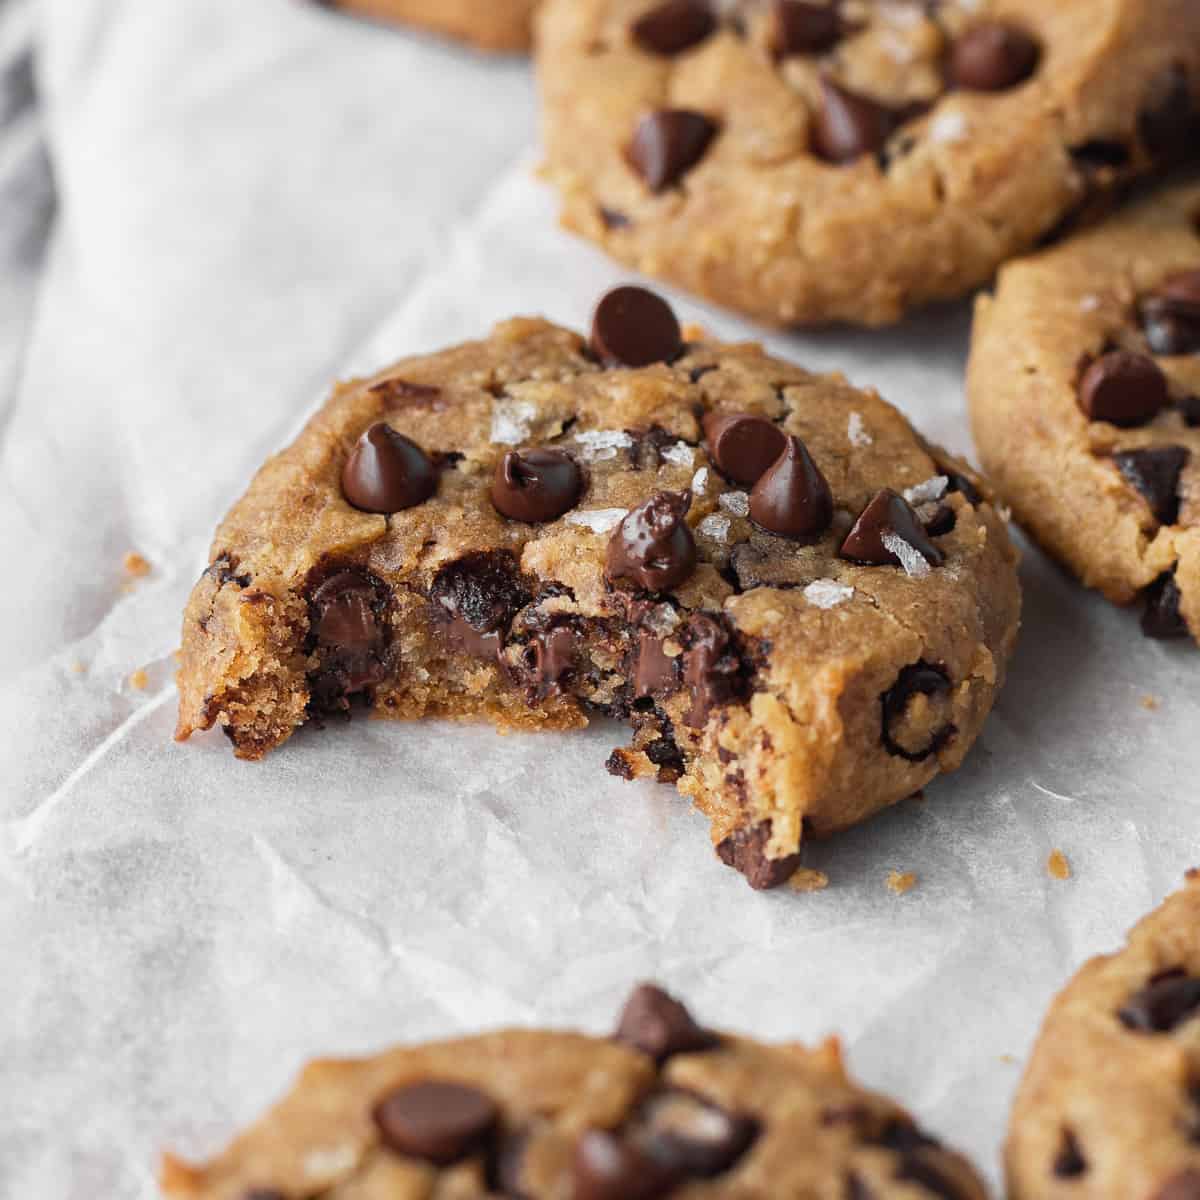 Chocolate chip chickpea cookie